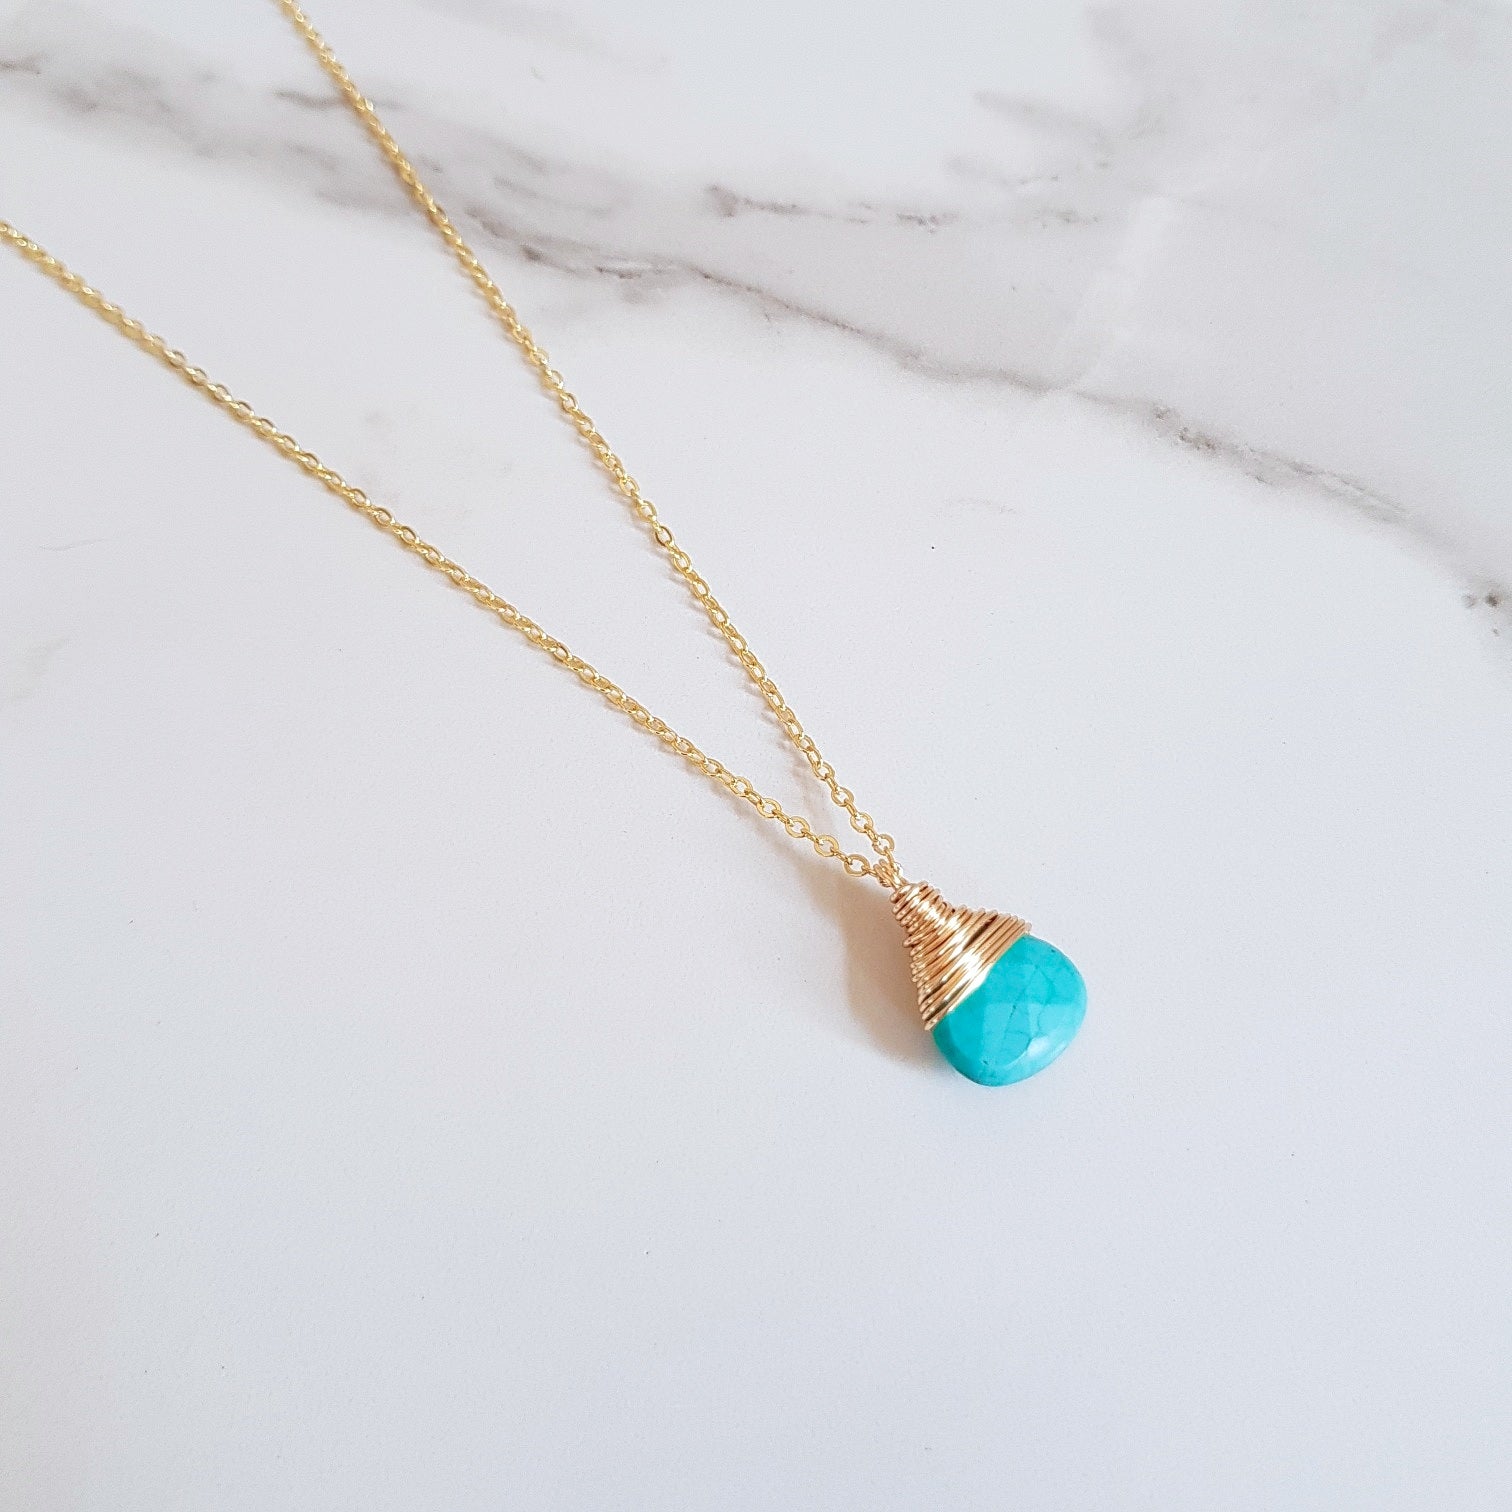 Bay Dainty Necklace - Turquoise